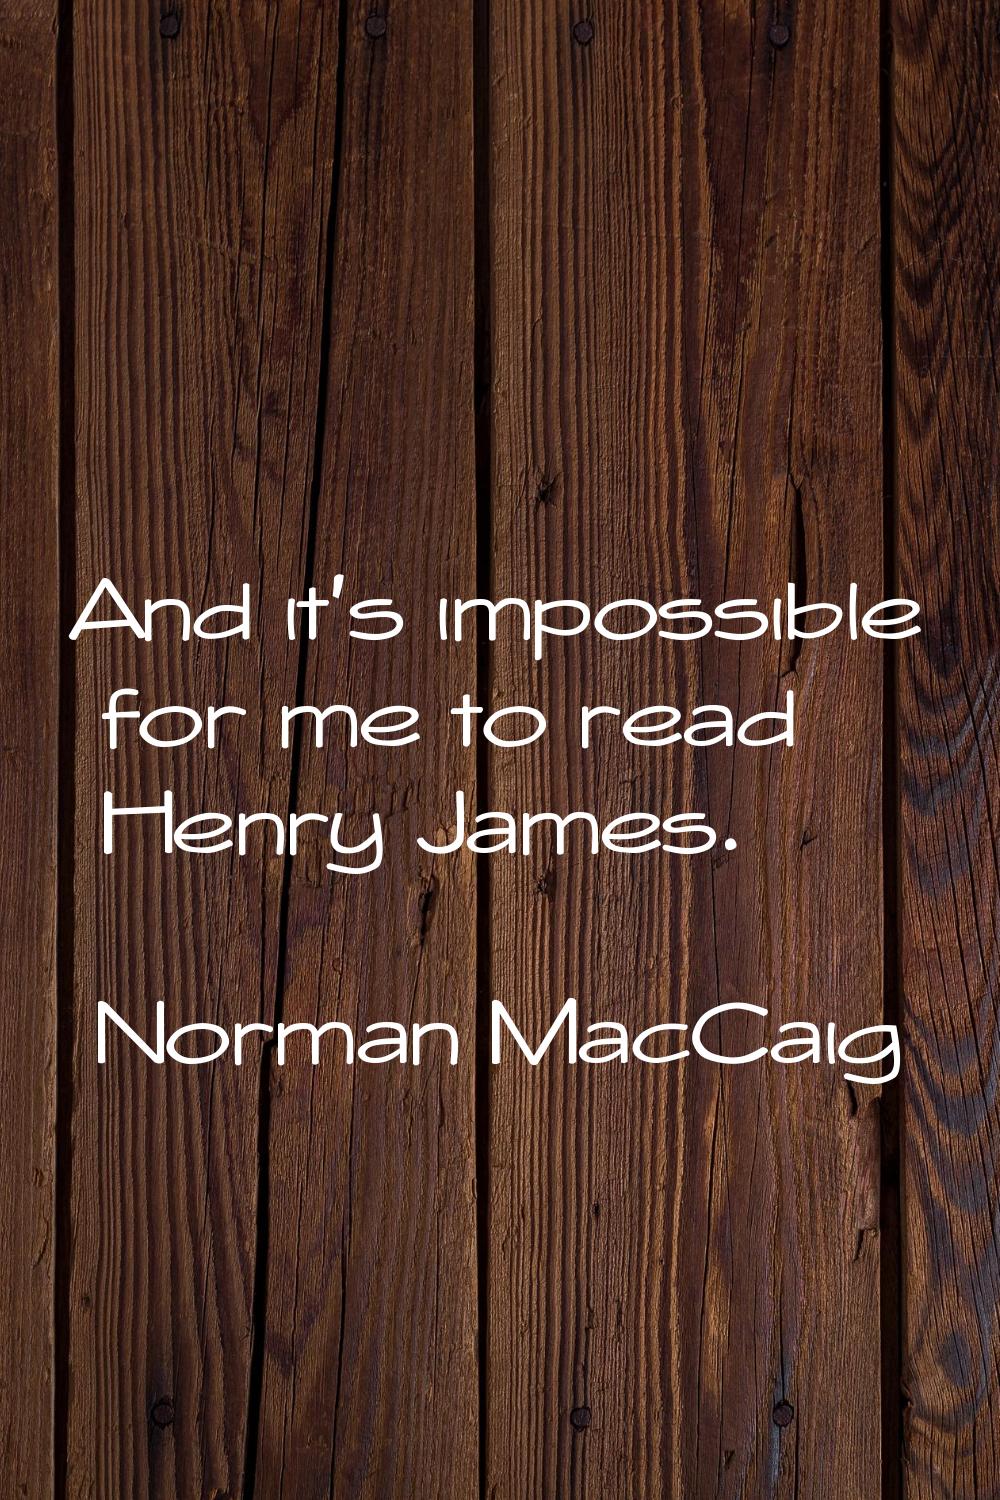 And it's impossible for me to read Henry James.